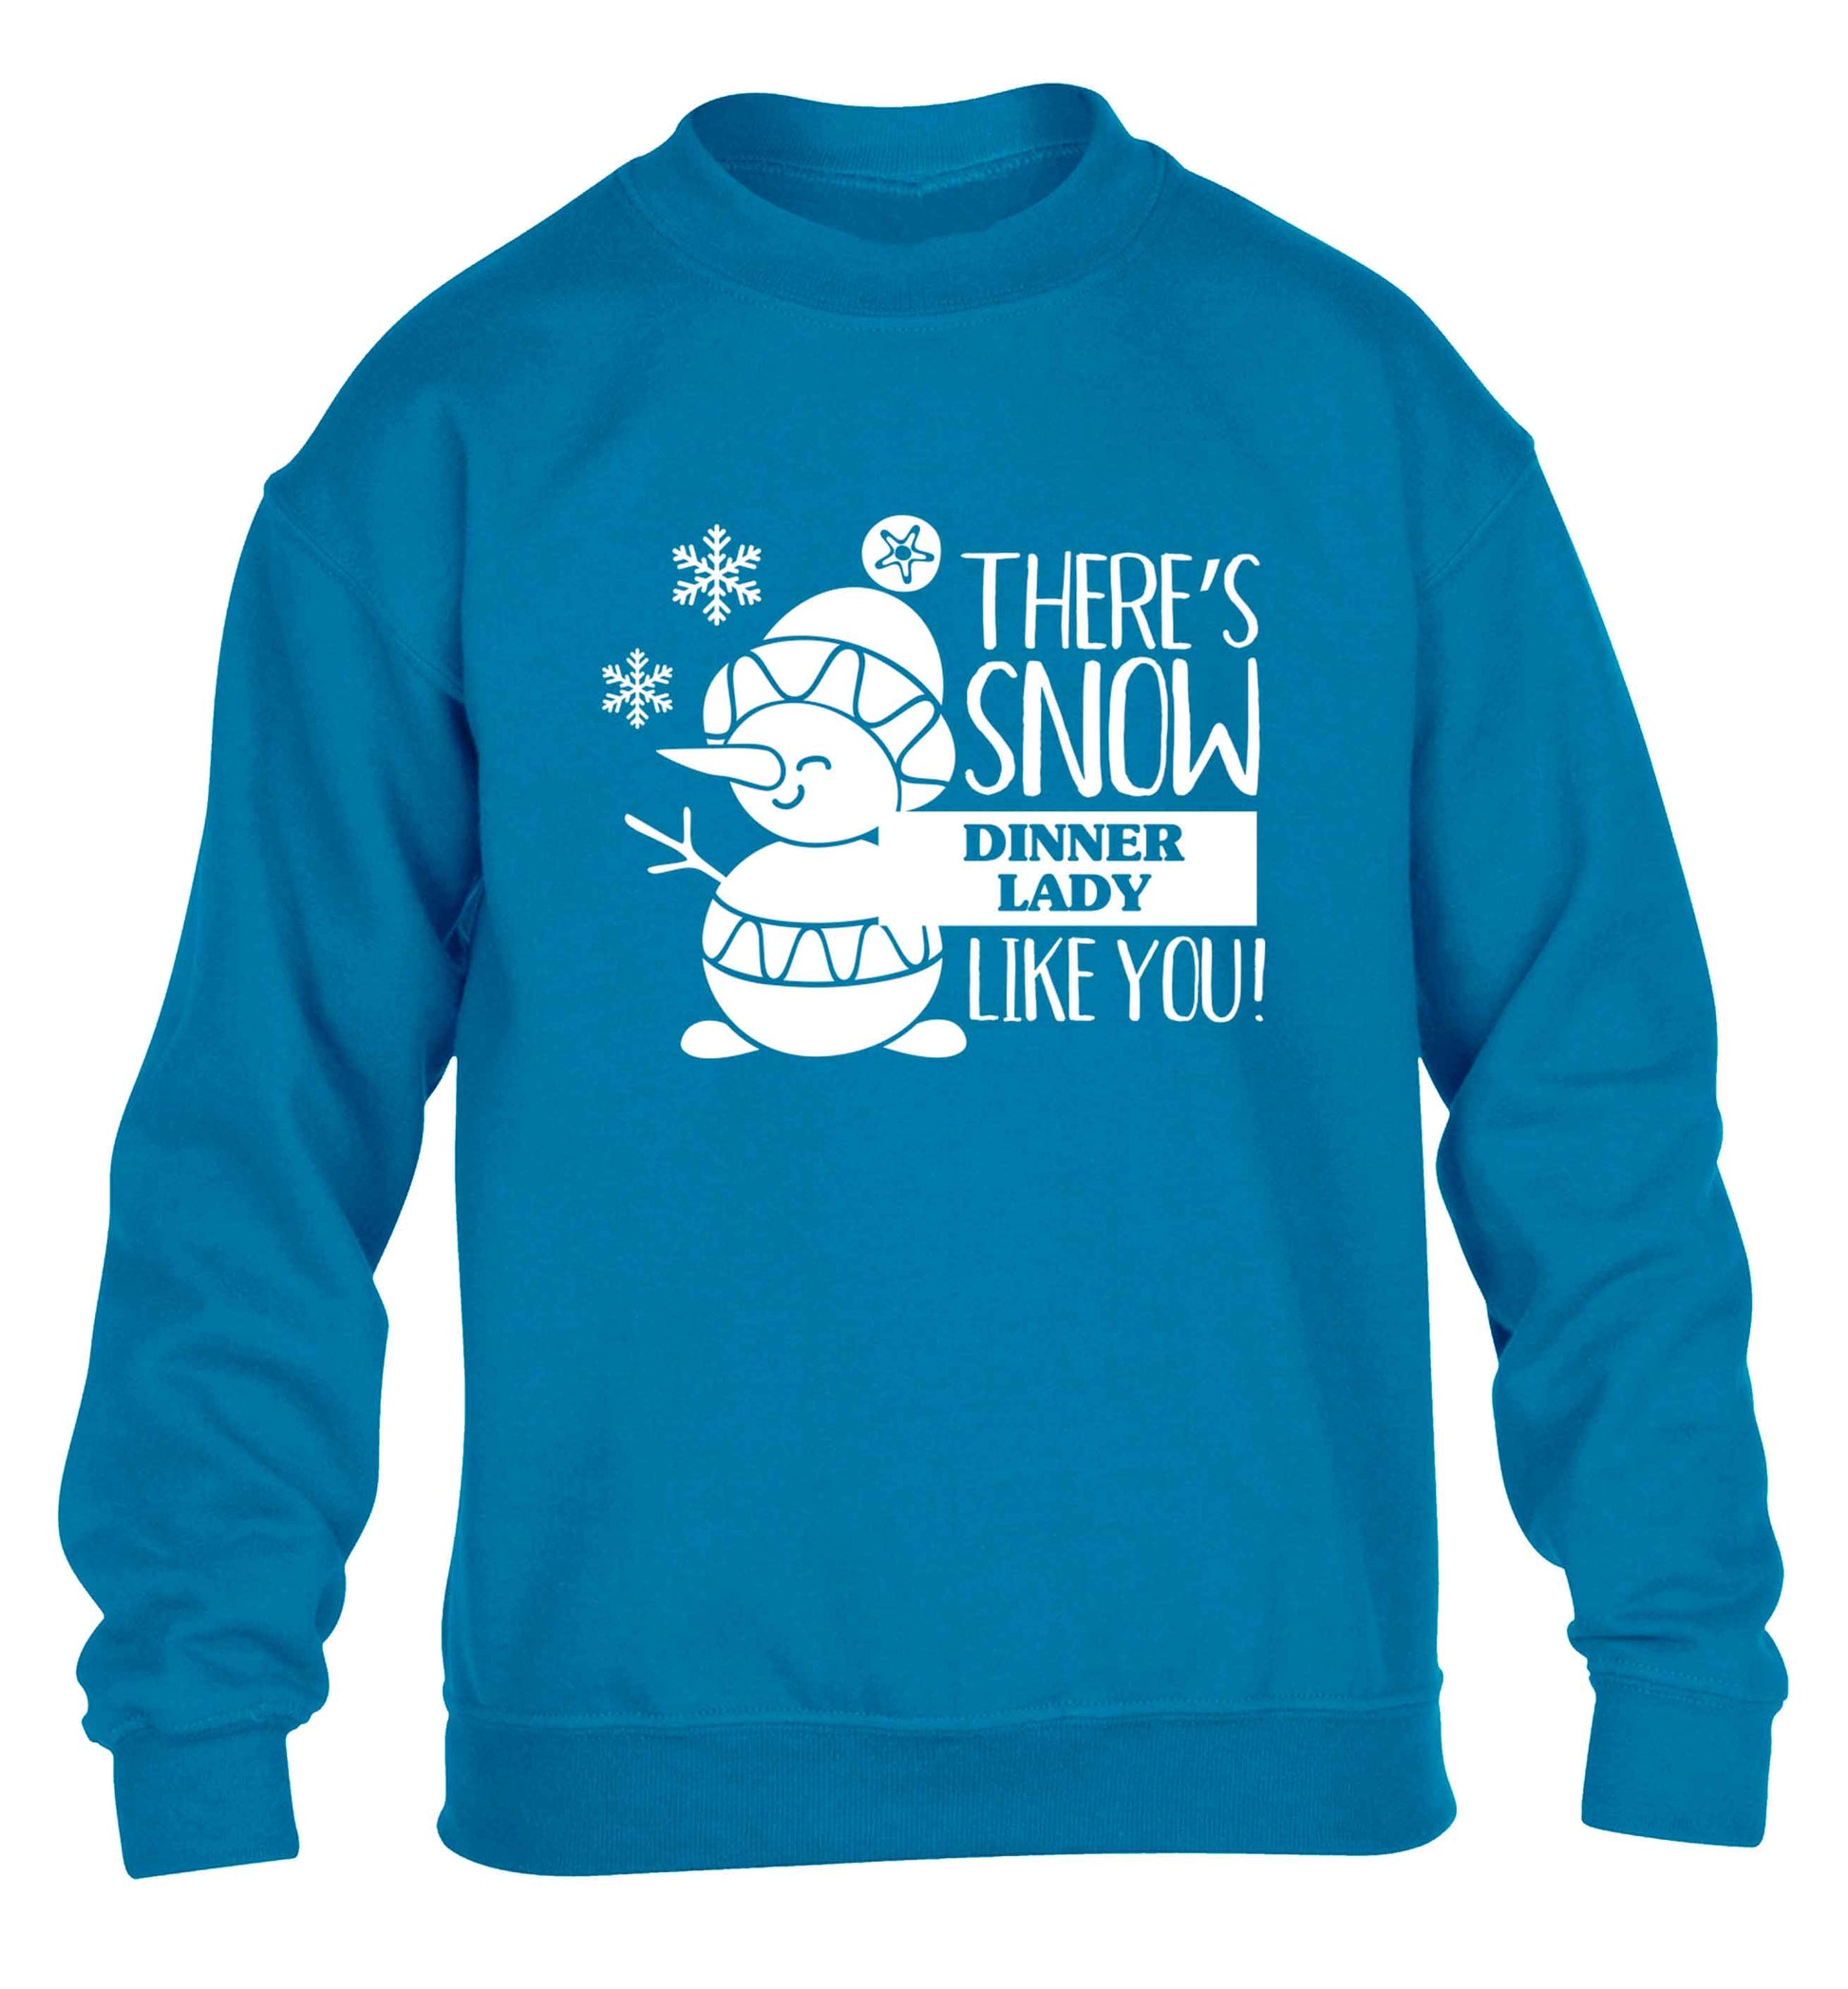 There's snow dinner lady like you children's blue sweater 12-13 Years